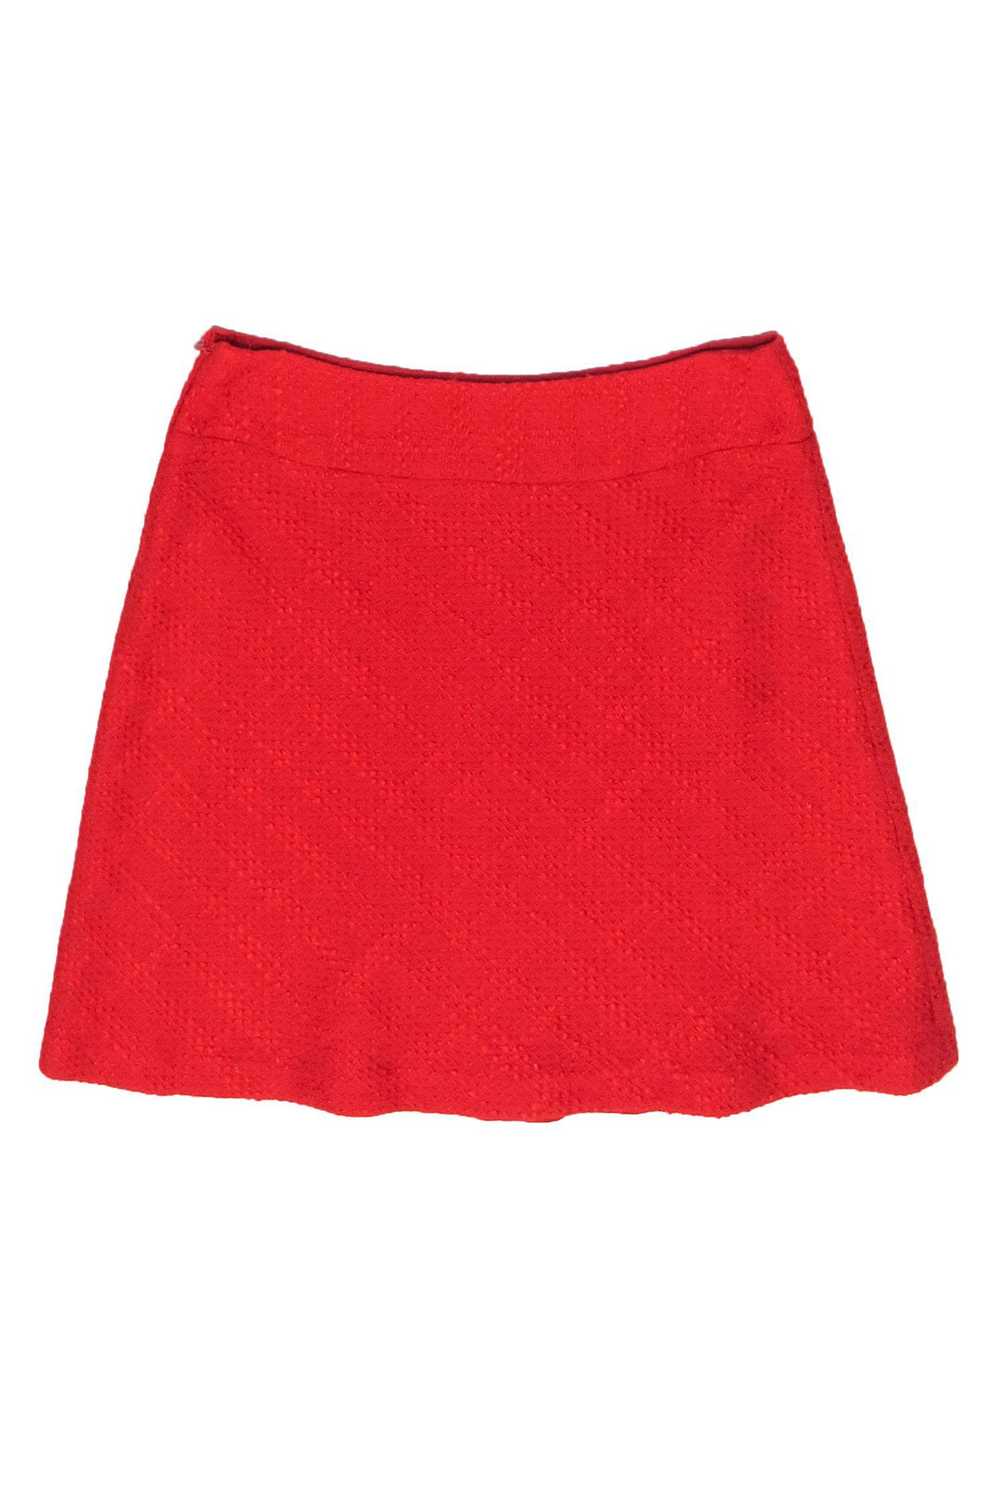 Sara Campbell - Red Tweed A-Line Skirt Sz 10 - image 2